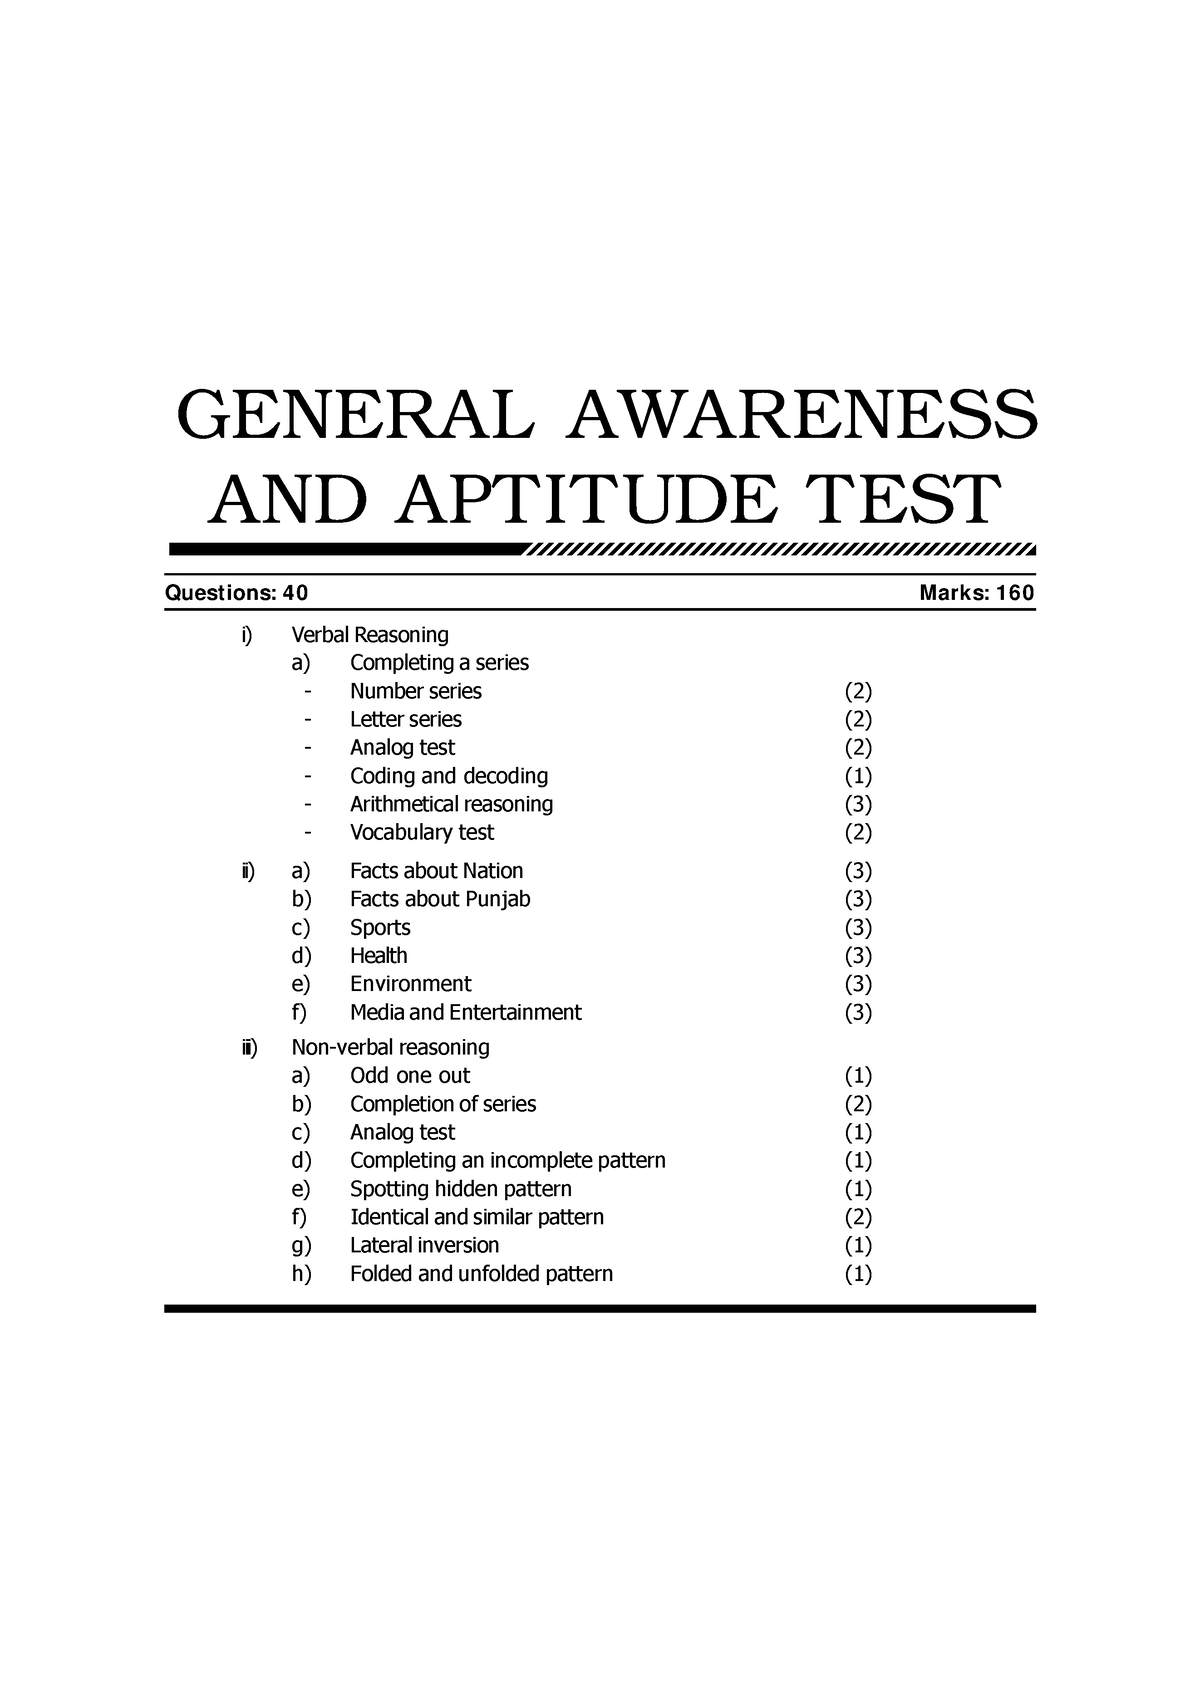 general-awareness-and-aptitude-test-questions-40-marks-160-i-verbal-reasoning-a-completing